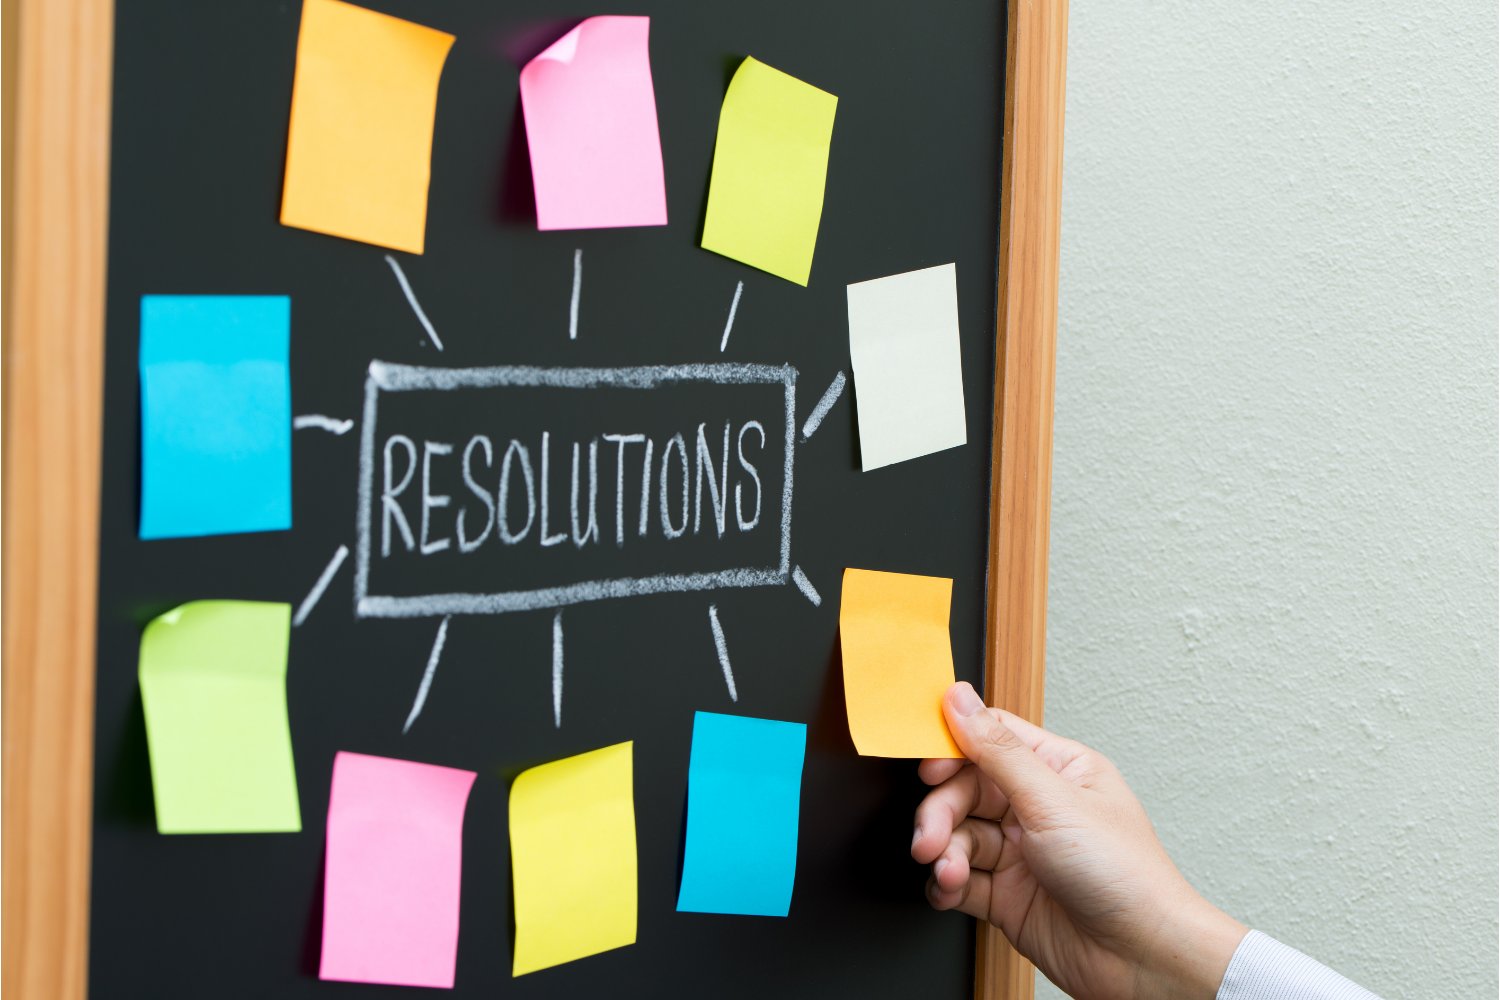 9 New Year’s Resolutions We Could All Benefit From